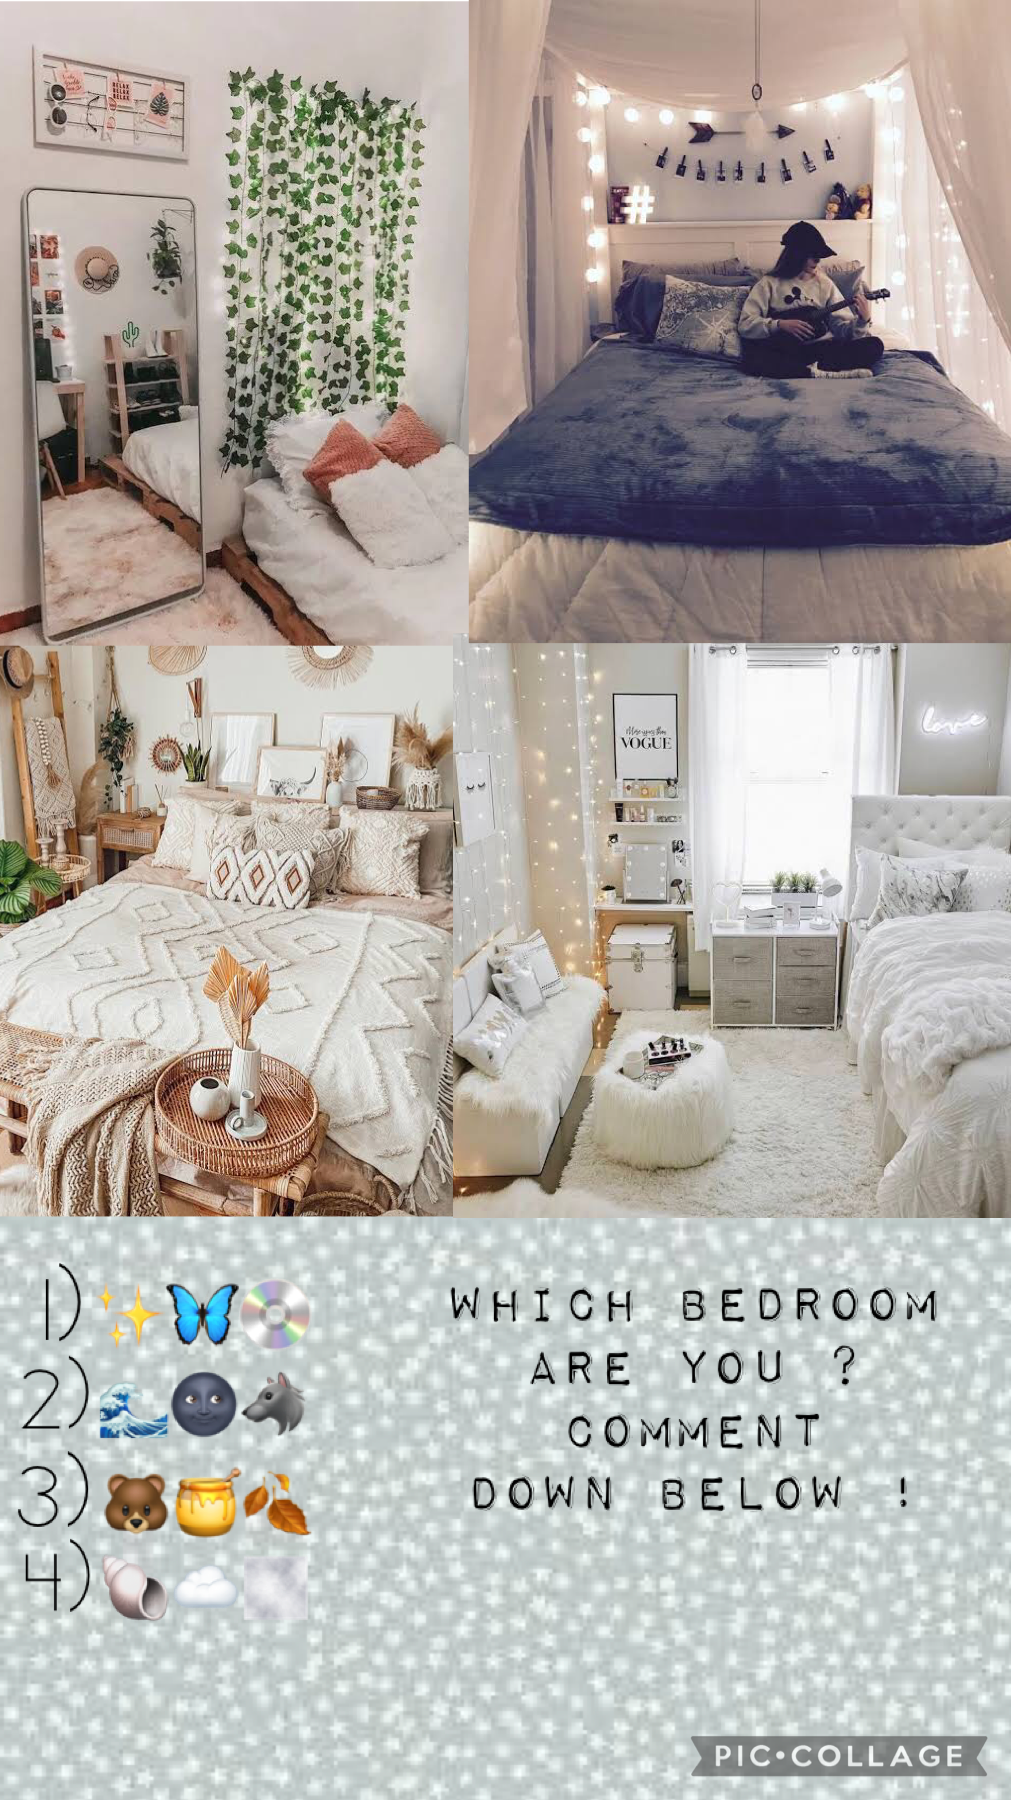 Comment which bedroom is most like you ! Mines defiantly number 1 ✨💿🦋